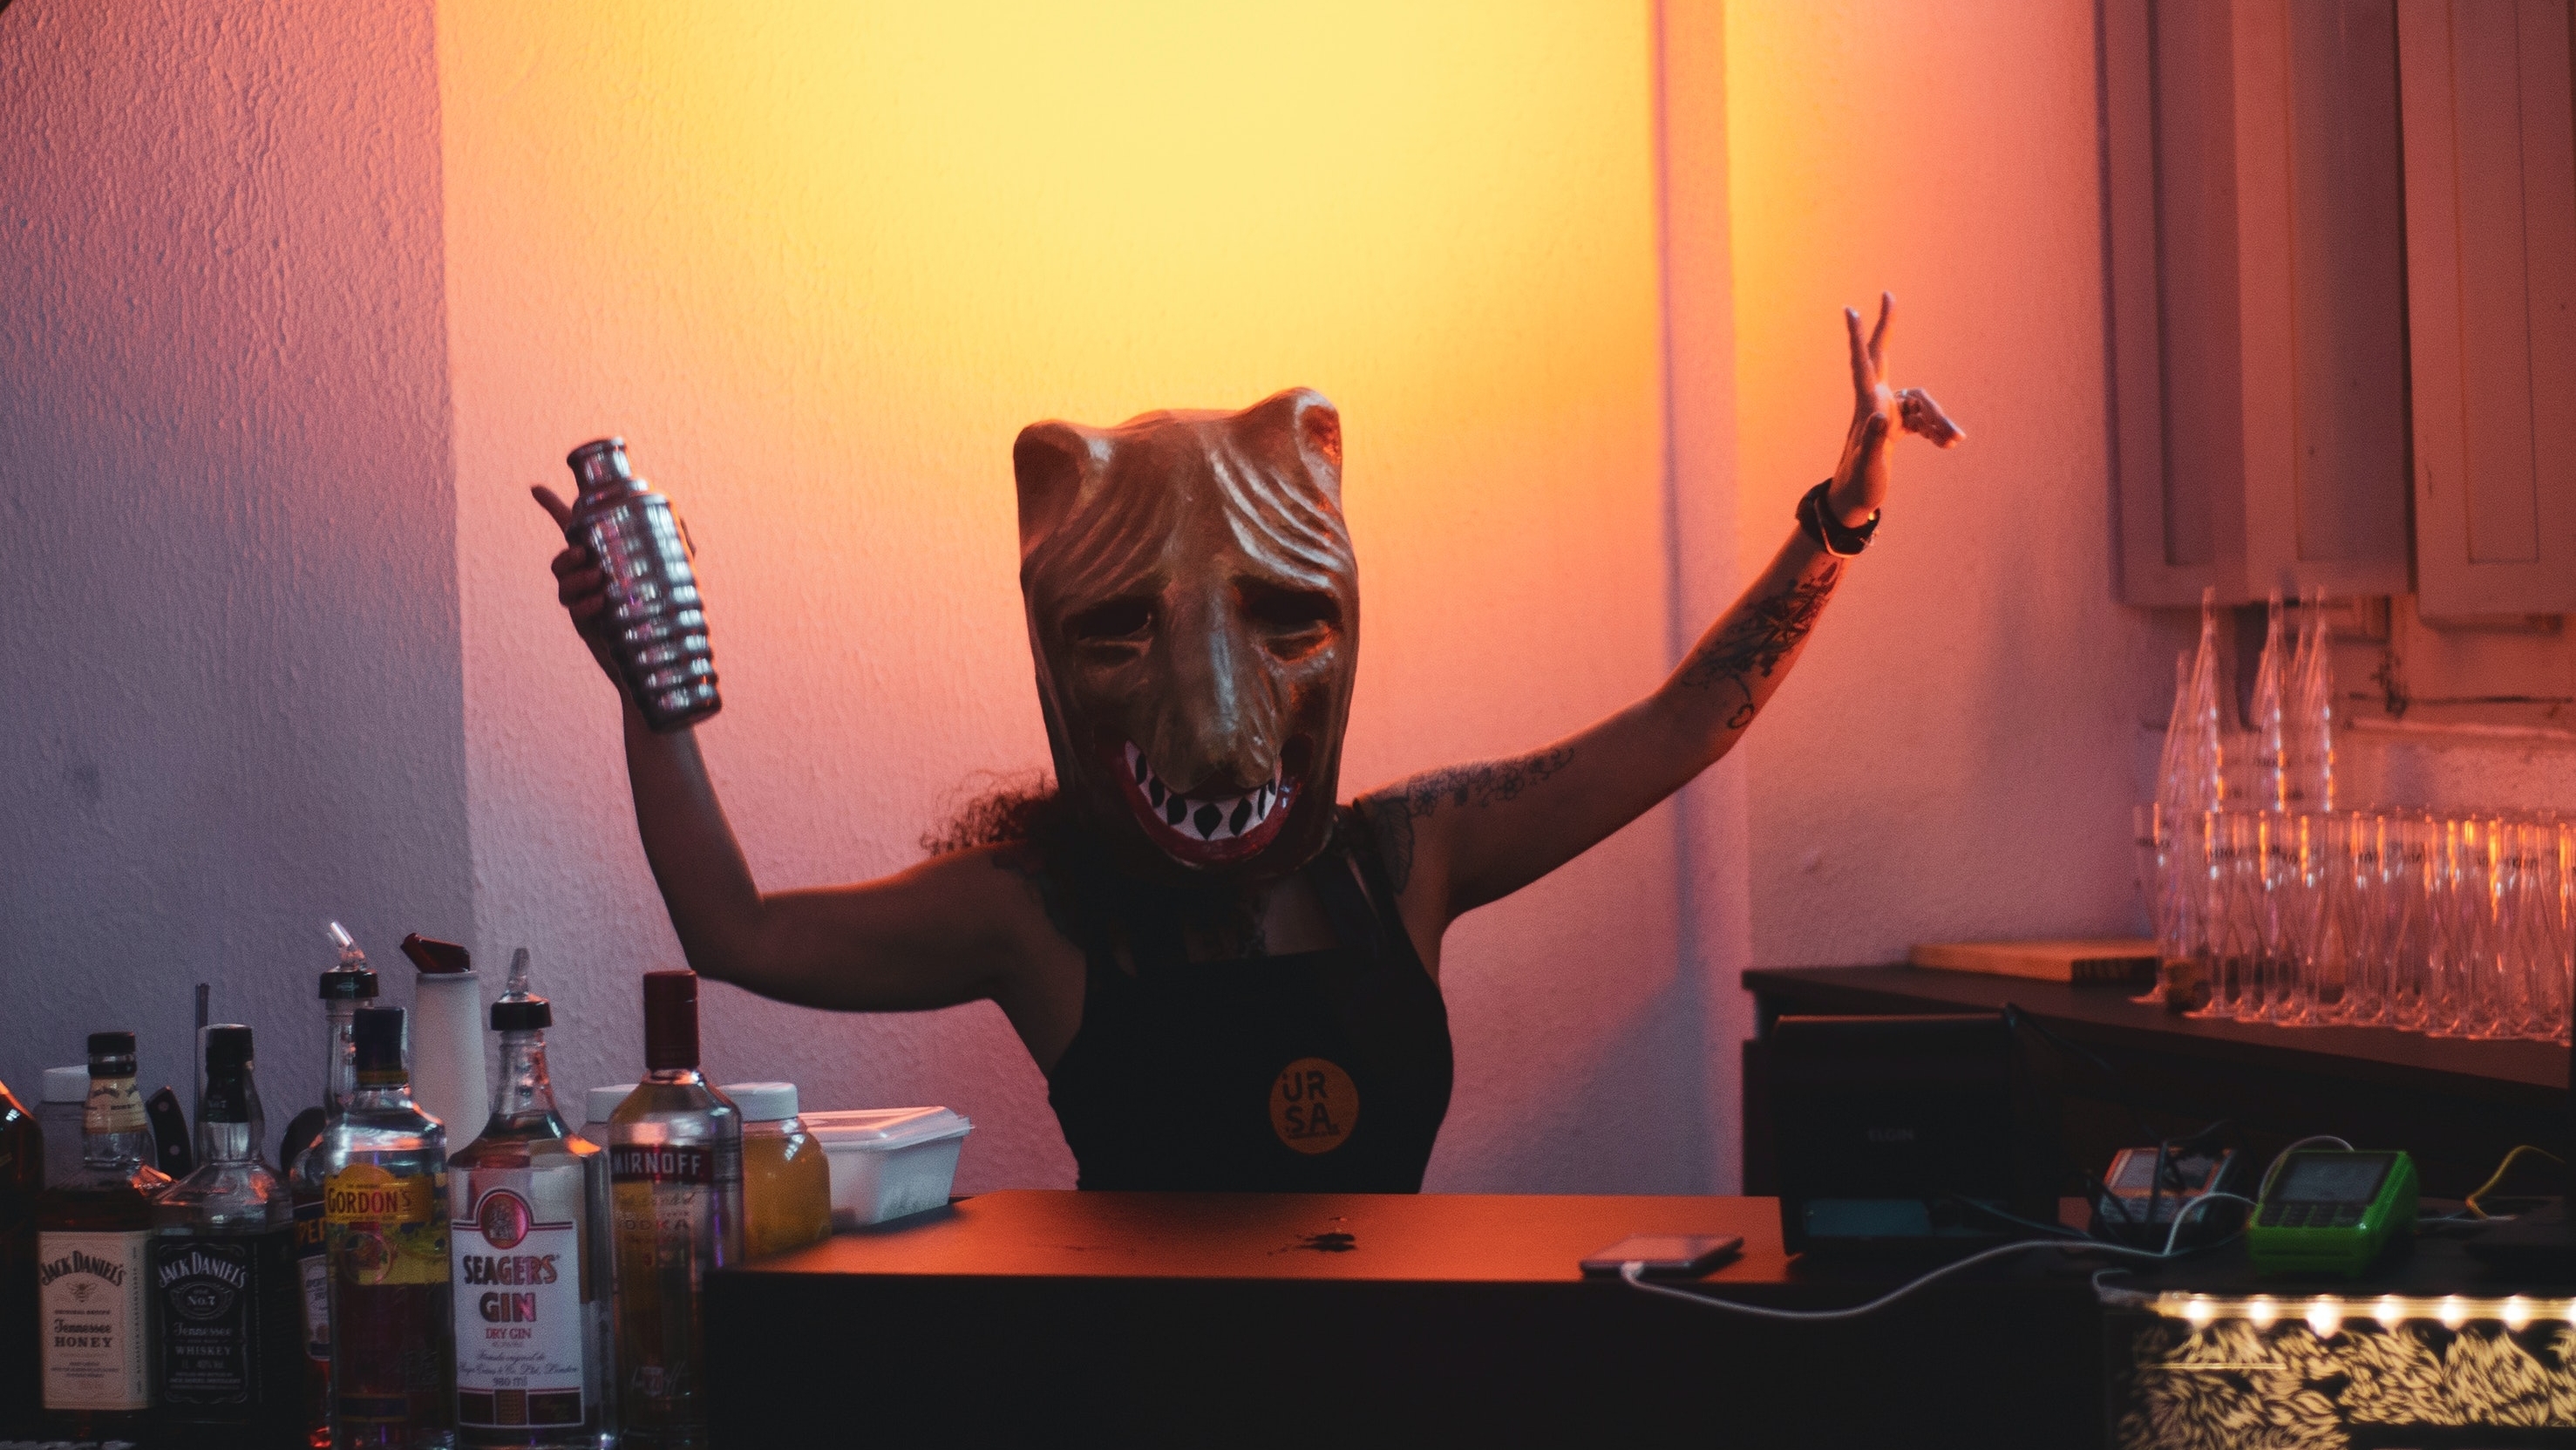 Woman in a scary animal mask dancing behind a bar holding up a cocktail shaker. 